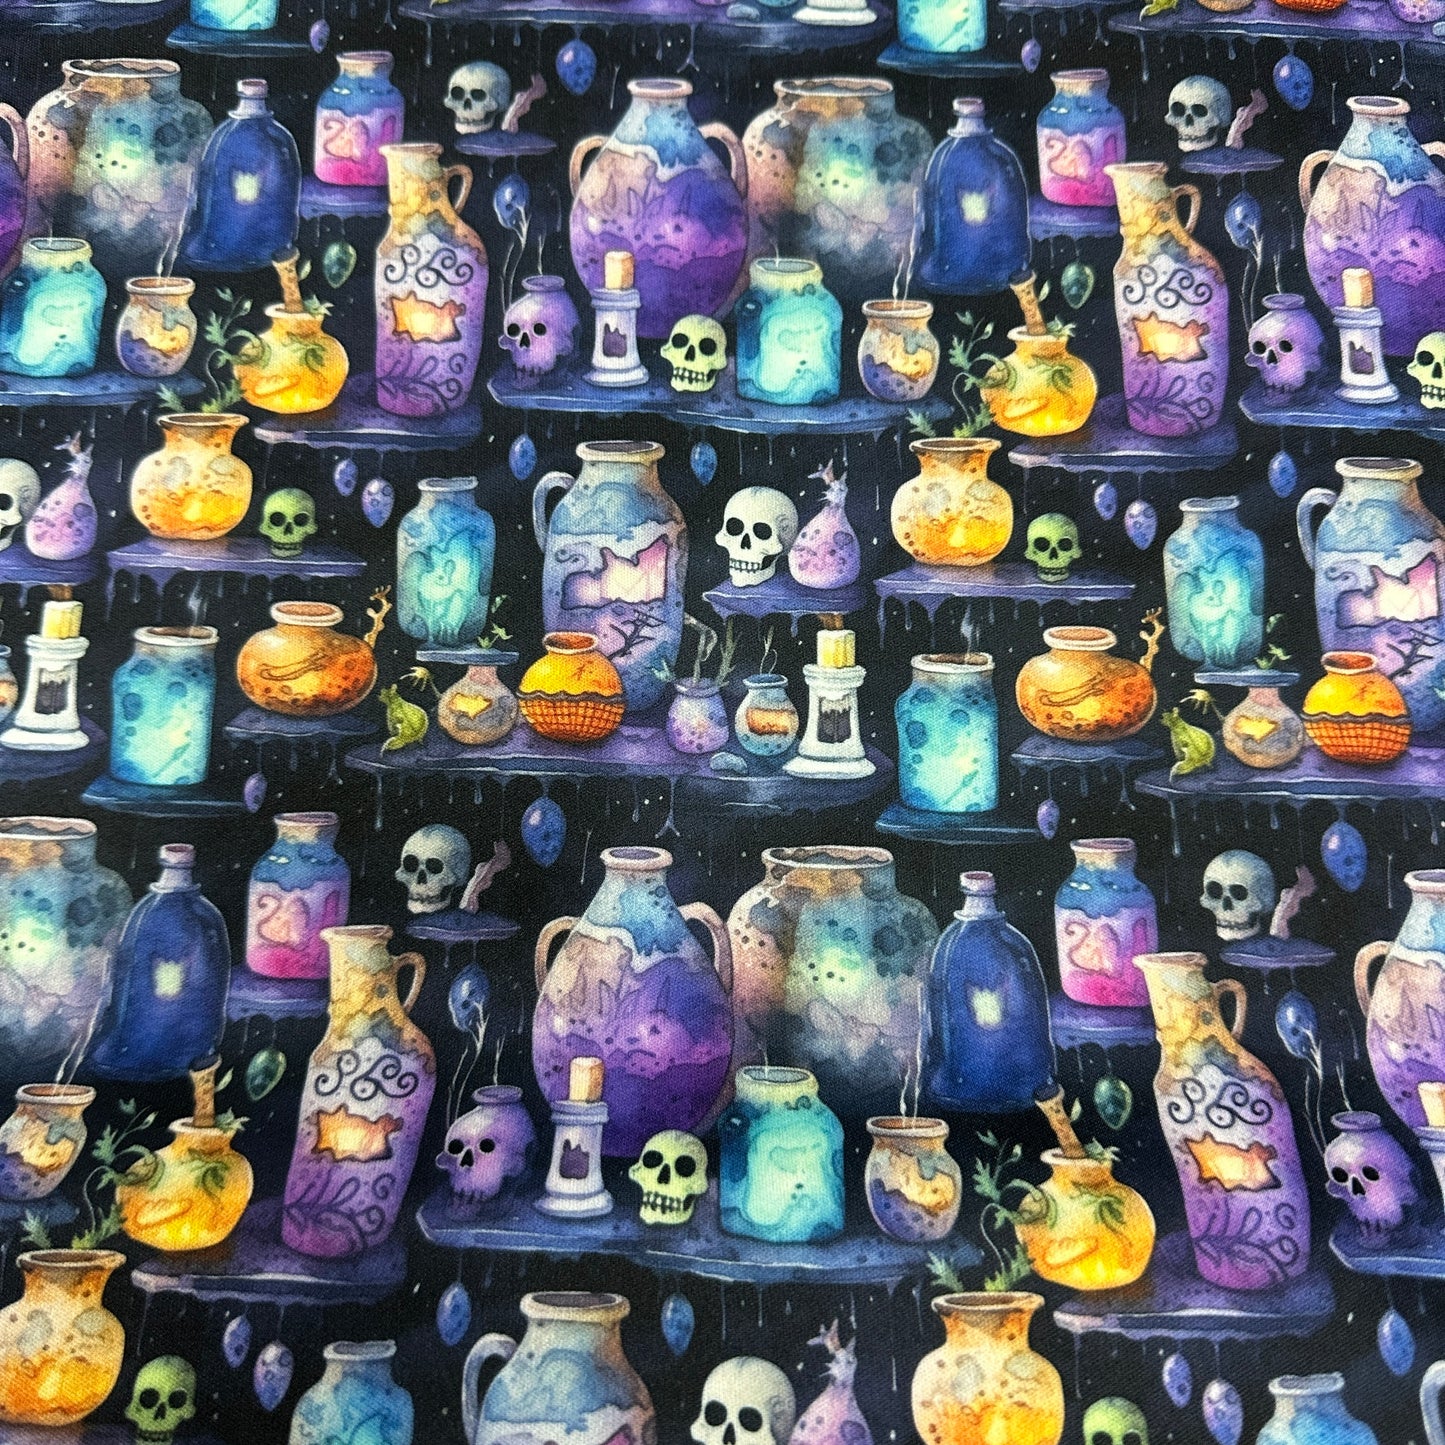 Purple Potions 1 mil PUL Fabric - Made in the USA